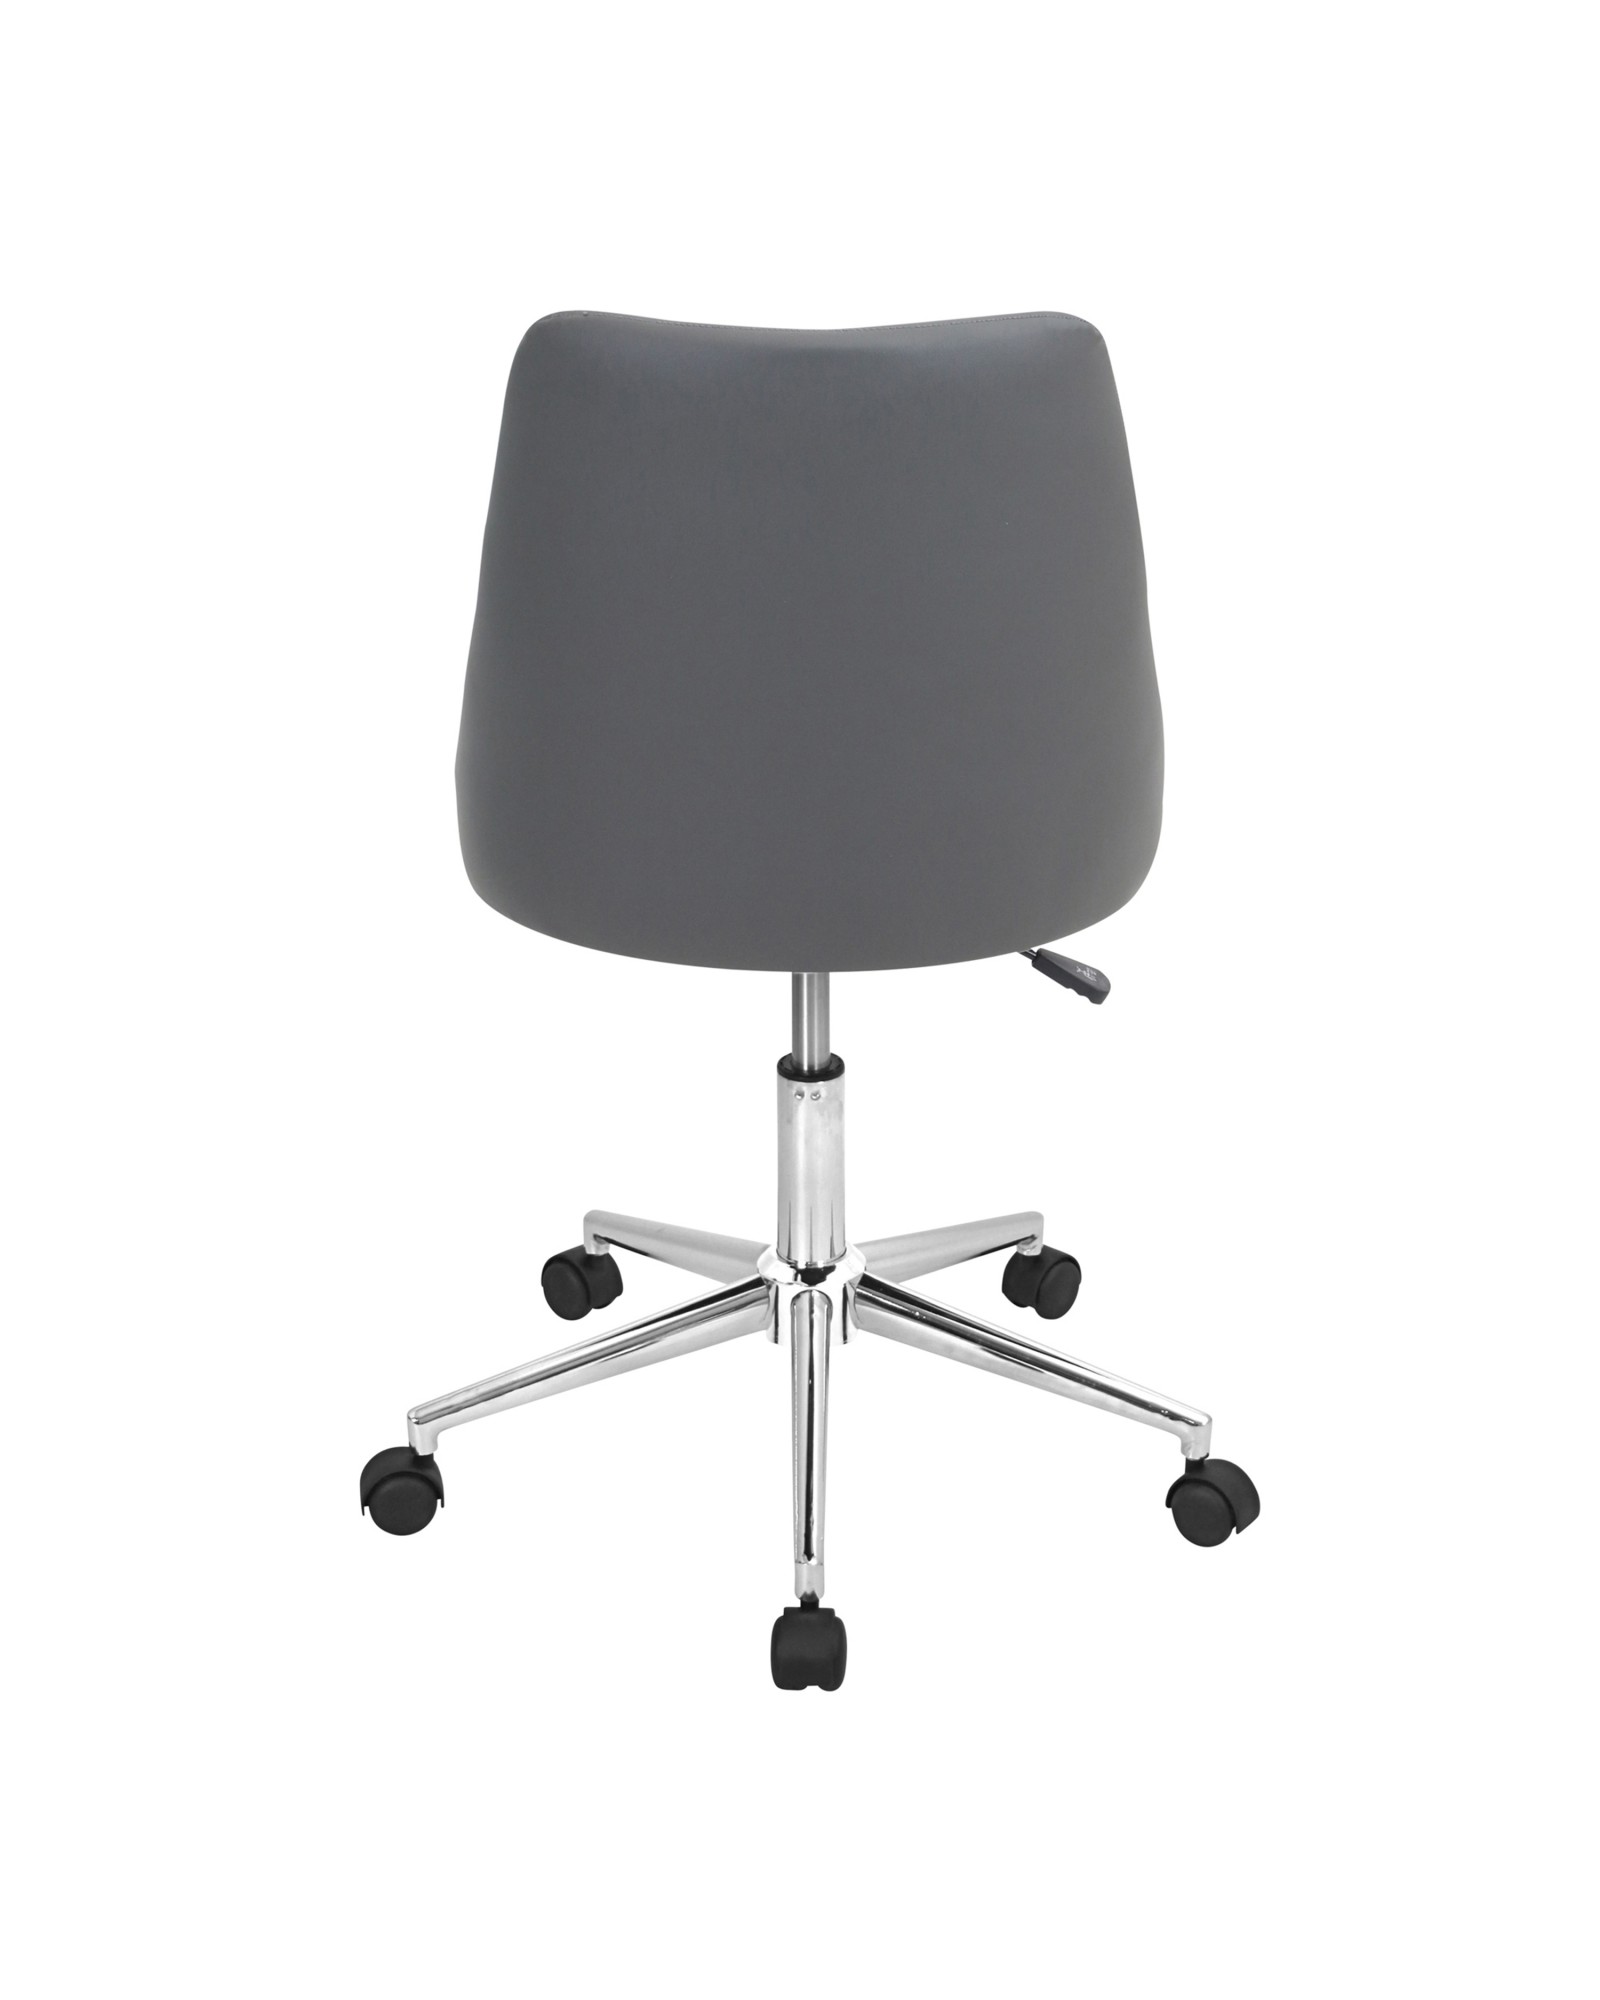 Marche Contemporary Adjustable Office Chair with Swivel in Grey Faux Leather